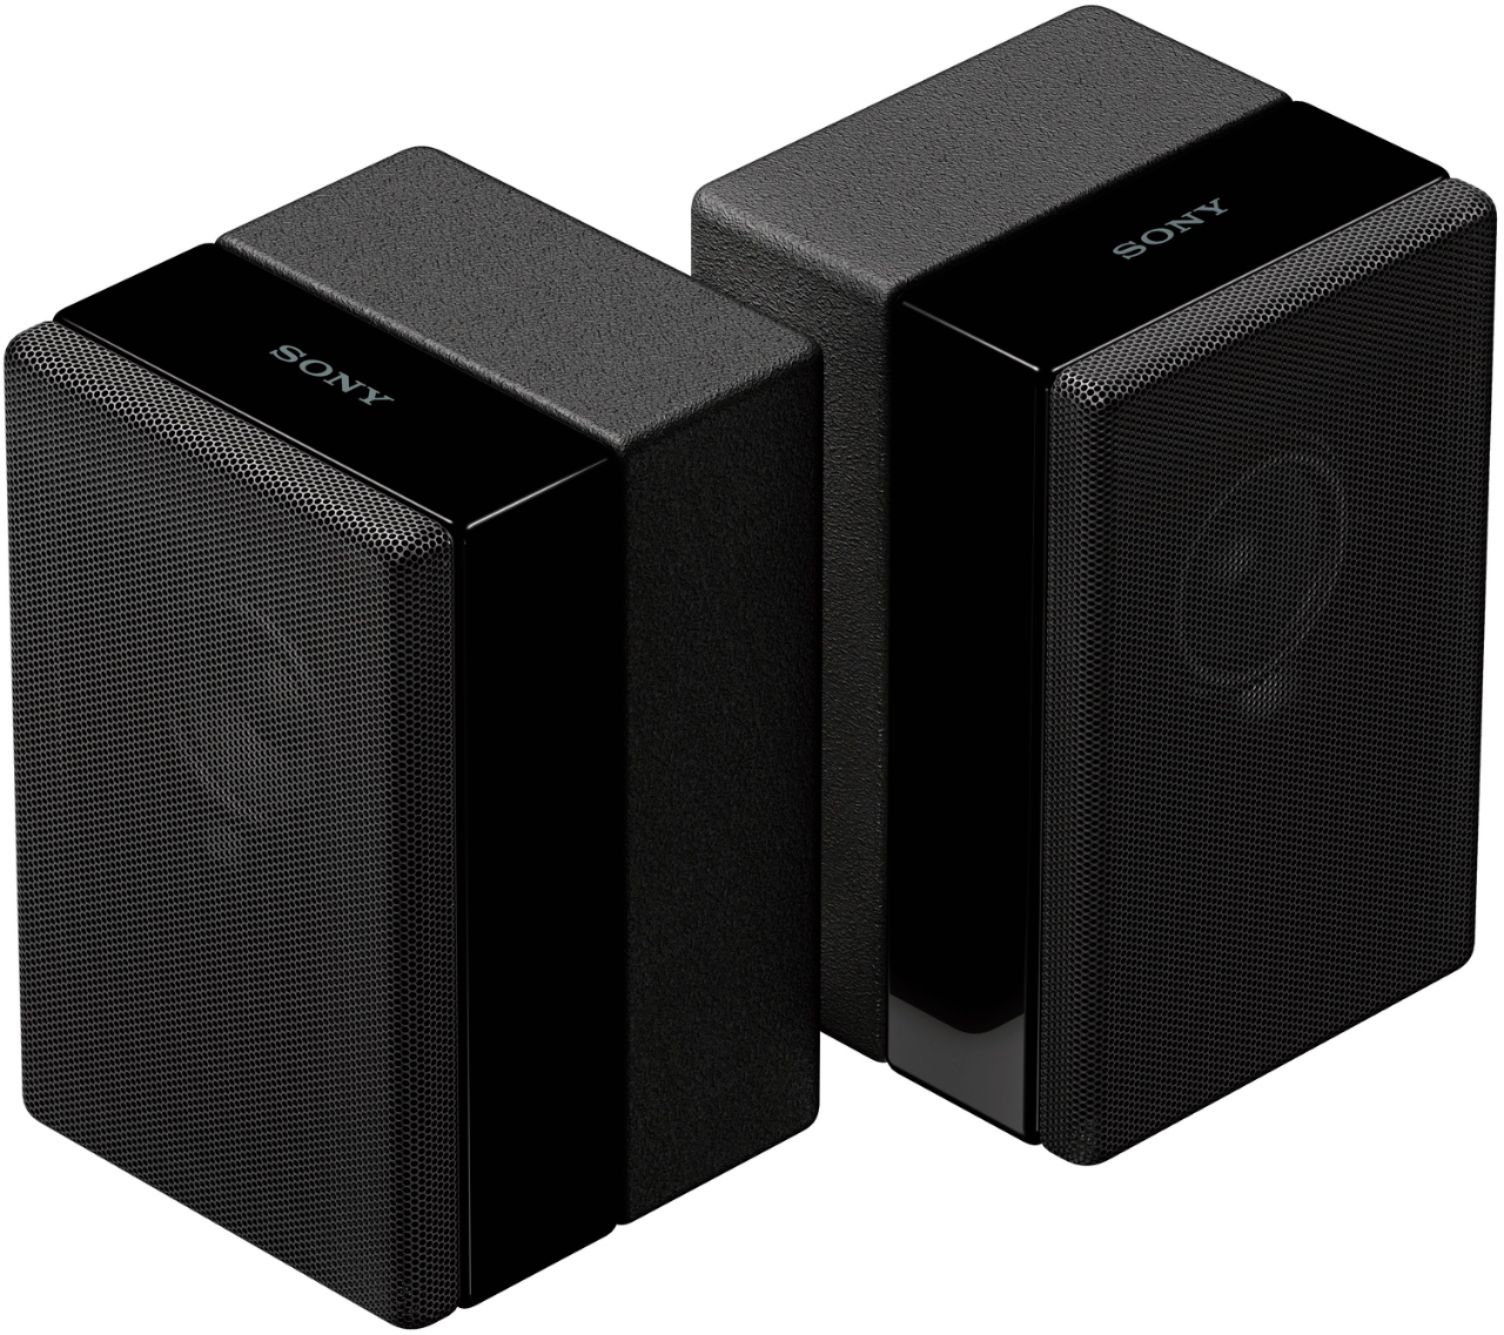 Angle View: Sony - Wireless Rear Channel Speakers (Pair) - Black